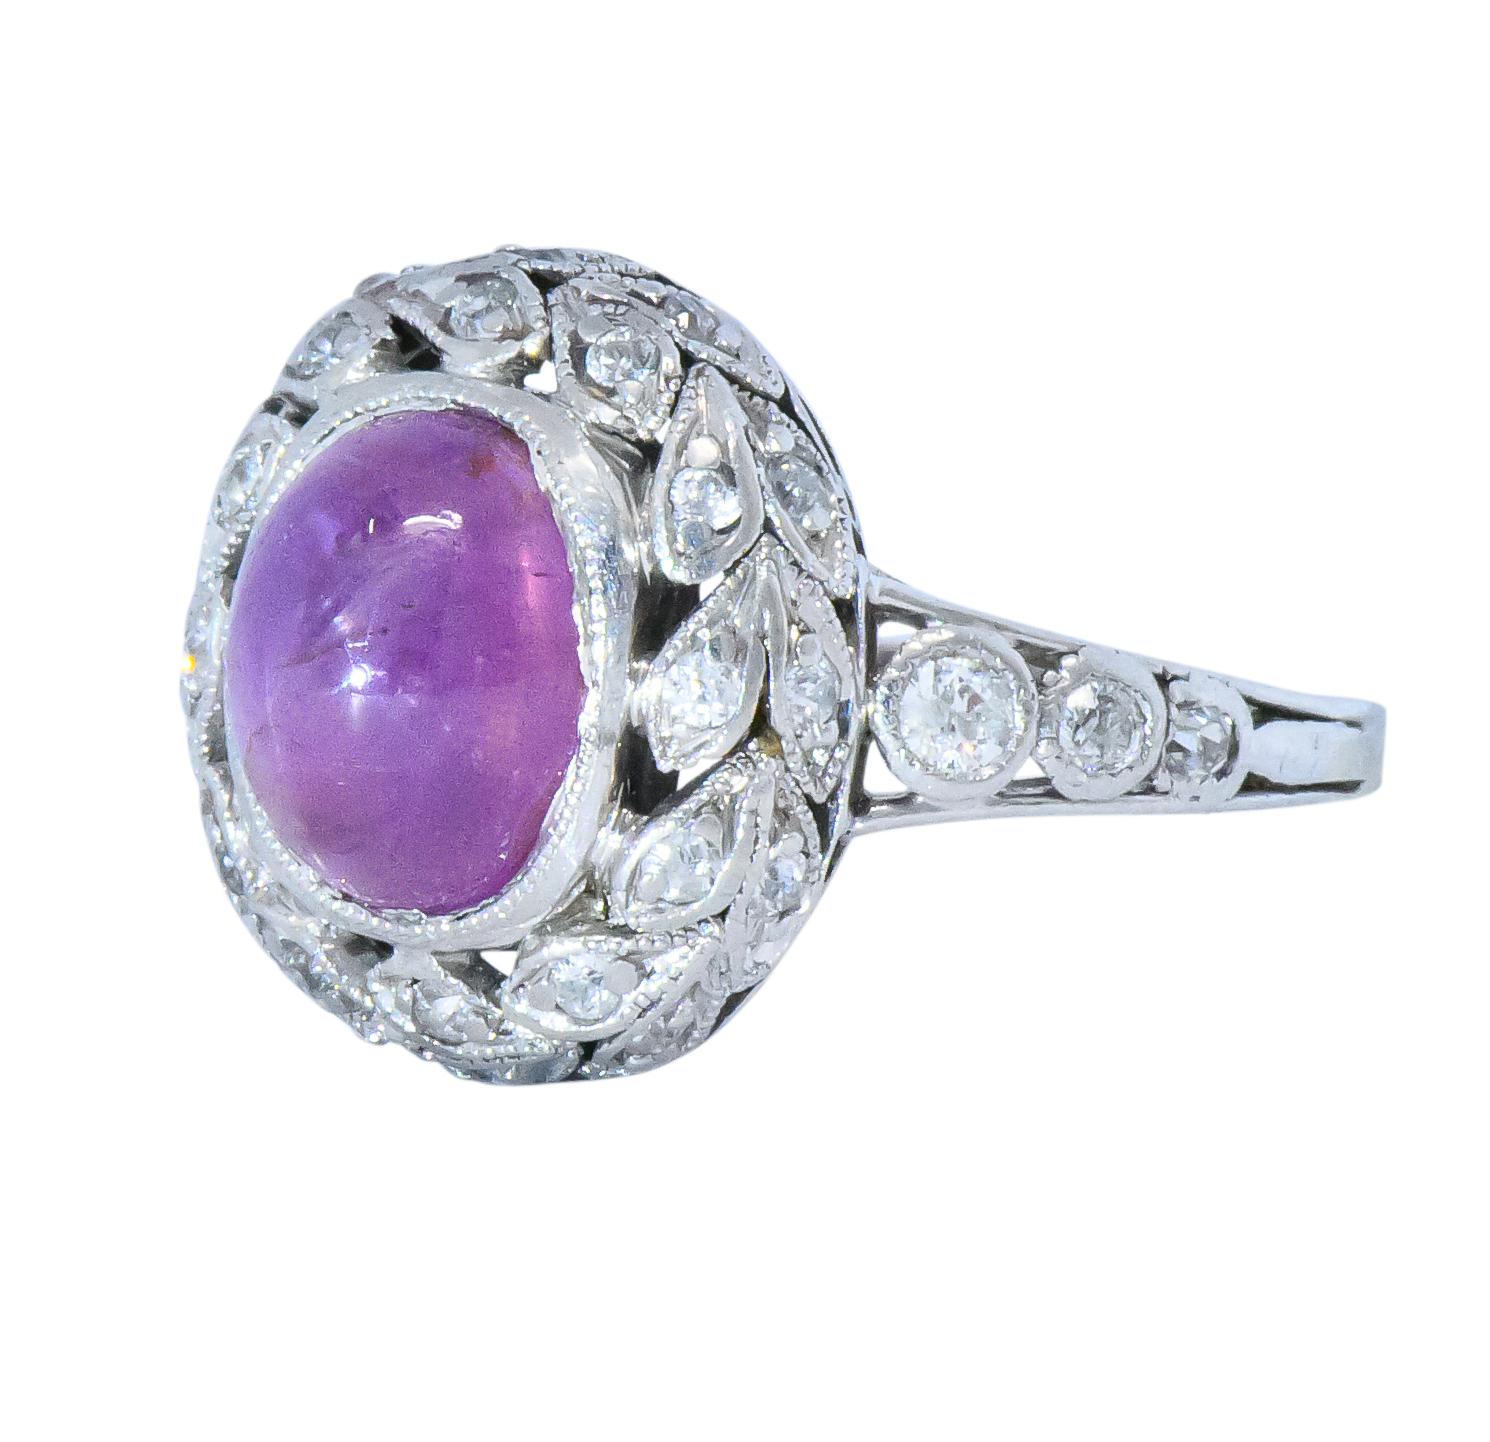 Centering an oval cabochon star pink sapphire weighing approximately 3.35 carats

Translucent and bright purplish-pink with a natural six rayed star 

Bezel set in a pierced mounting with a foliate surround accented by miligrain

Set throughout by